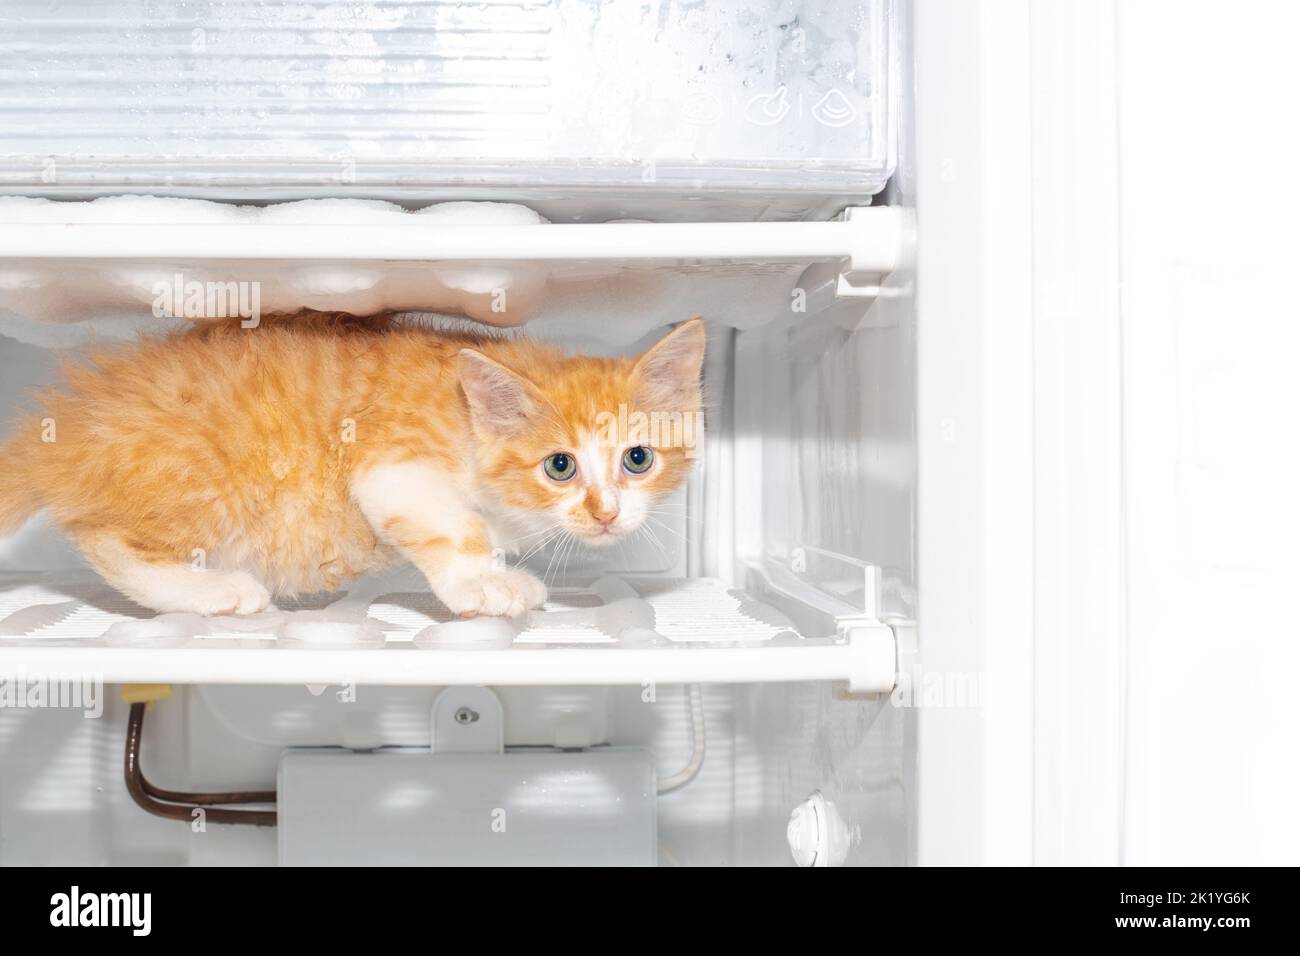 Ginger kitten on the shelf of the freezer. Defrosting the refrigerator, household chores. Stock Photo